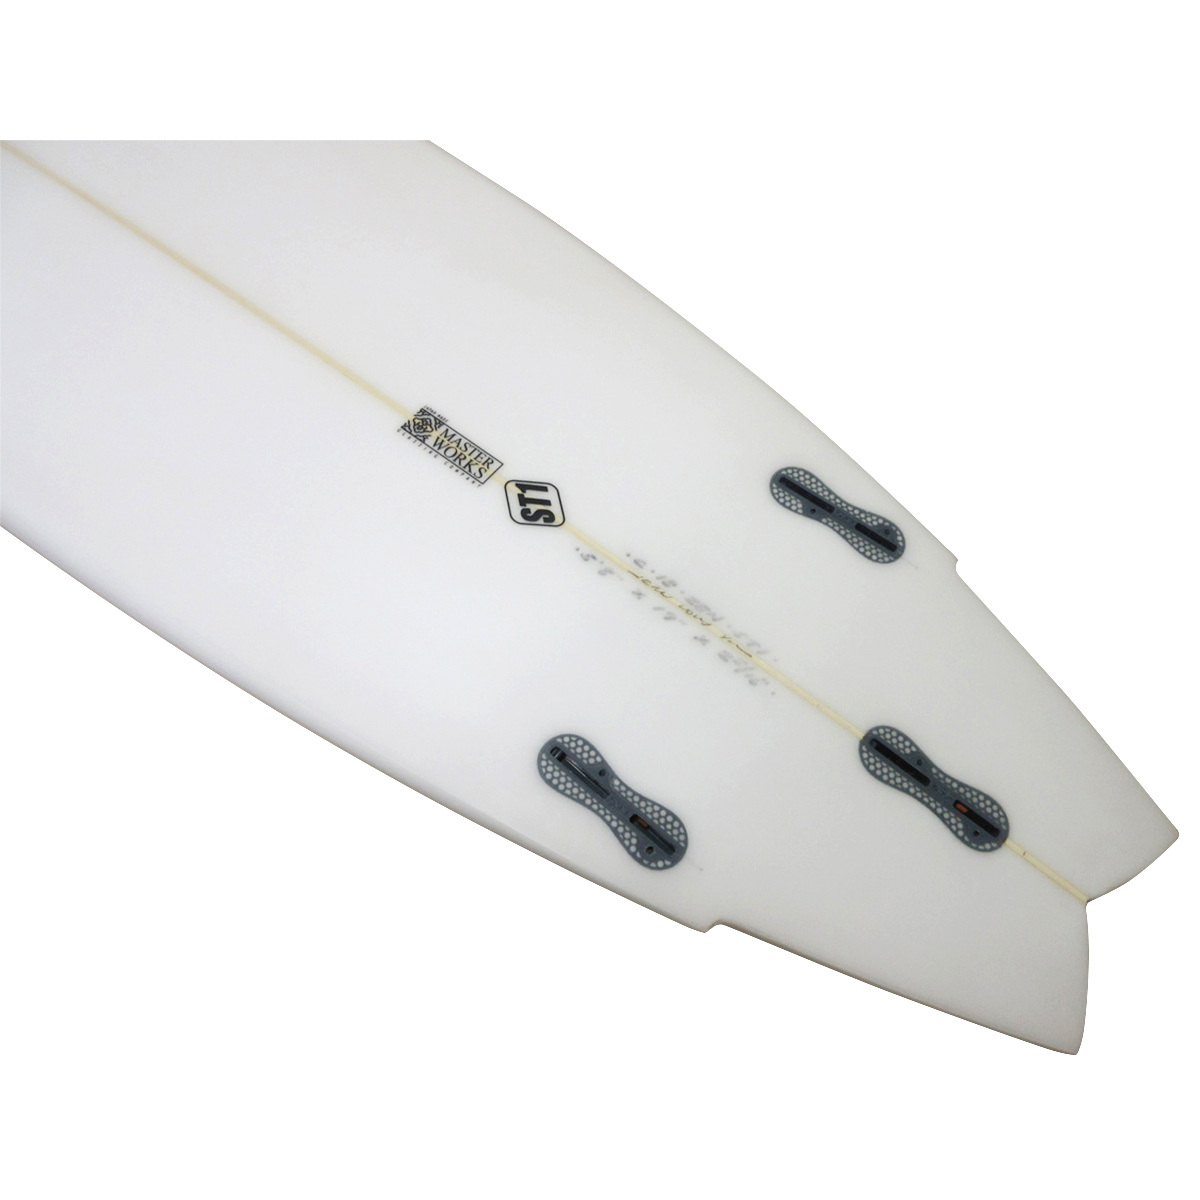 TOKORO SURFBOARDS  / 5'8 ST-1 Japan Made